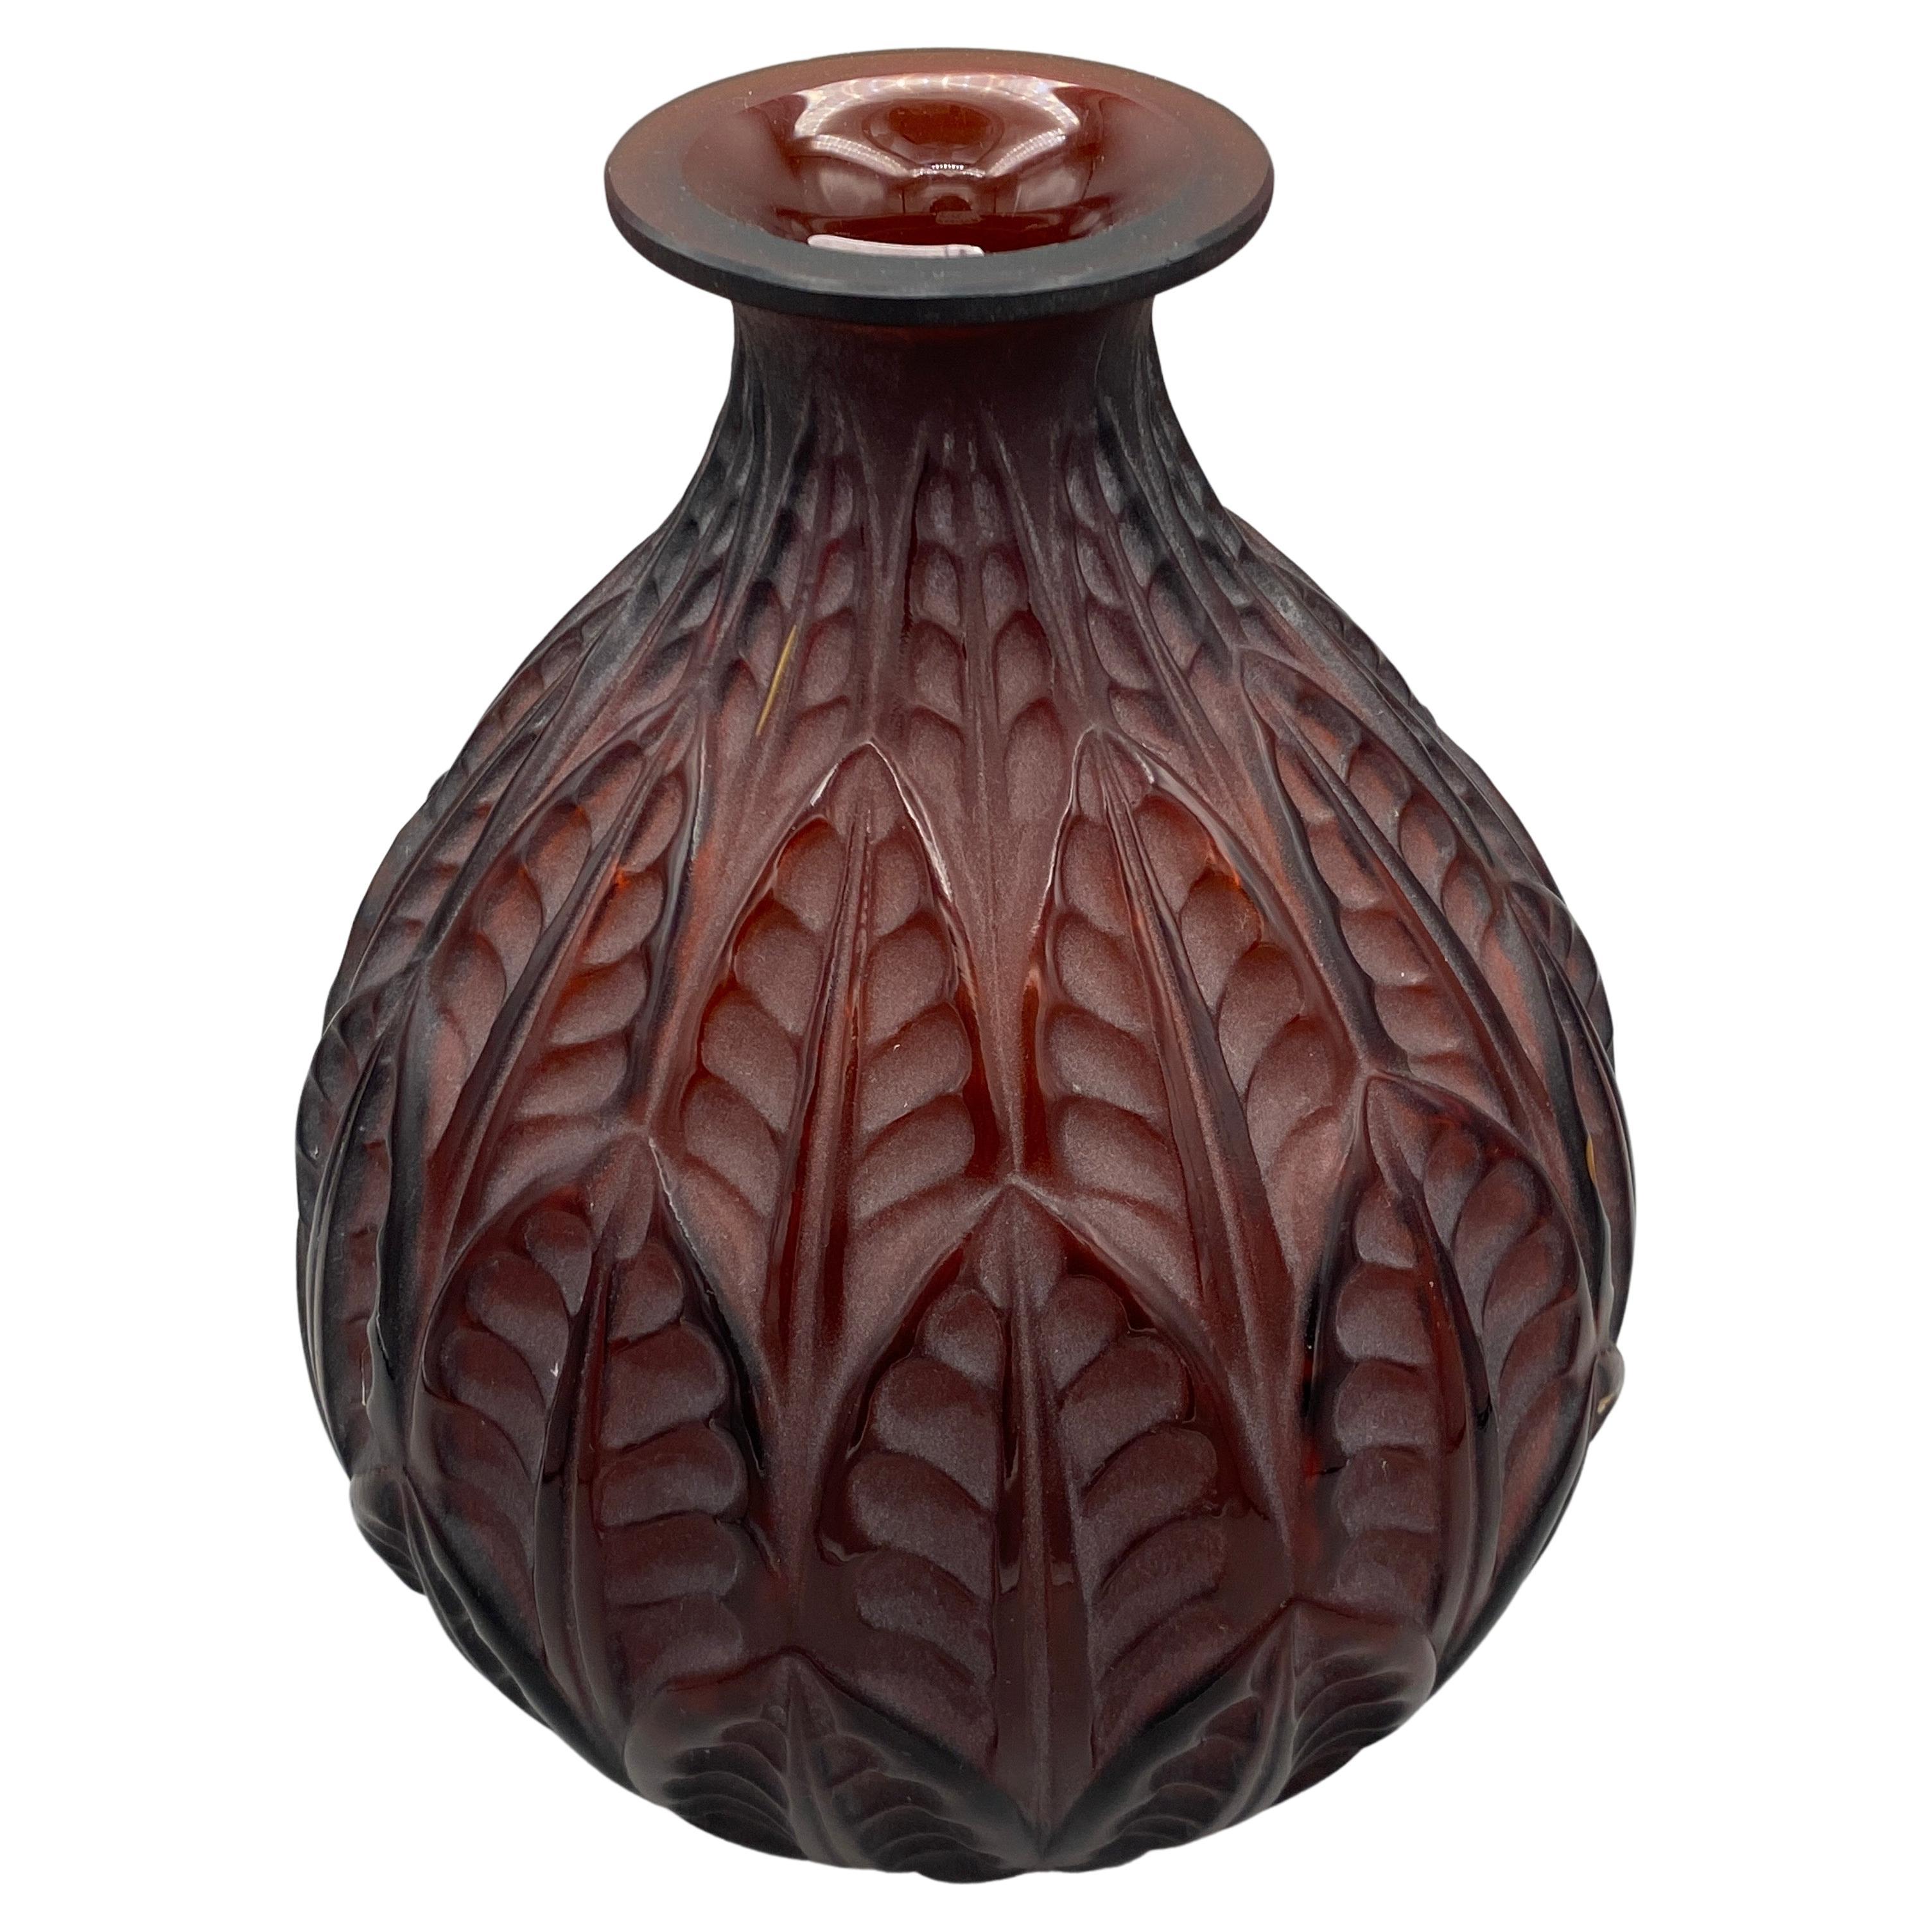 A Rene Lalique Art Deco amber glass Malesherbes vase . For Sale at 1stDibs